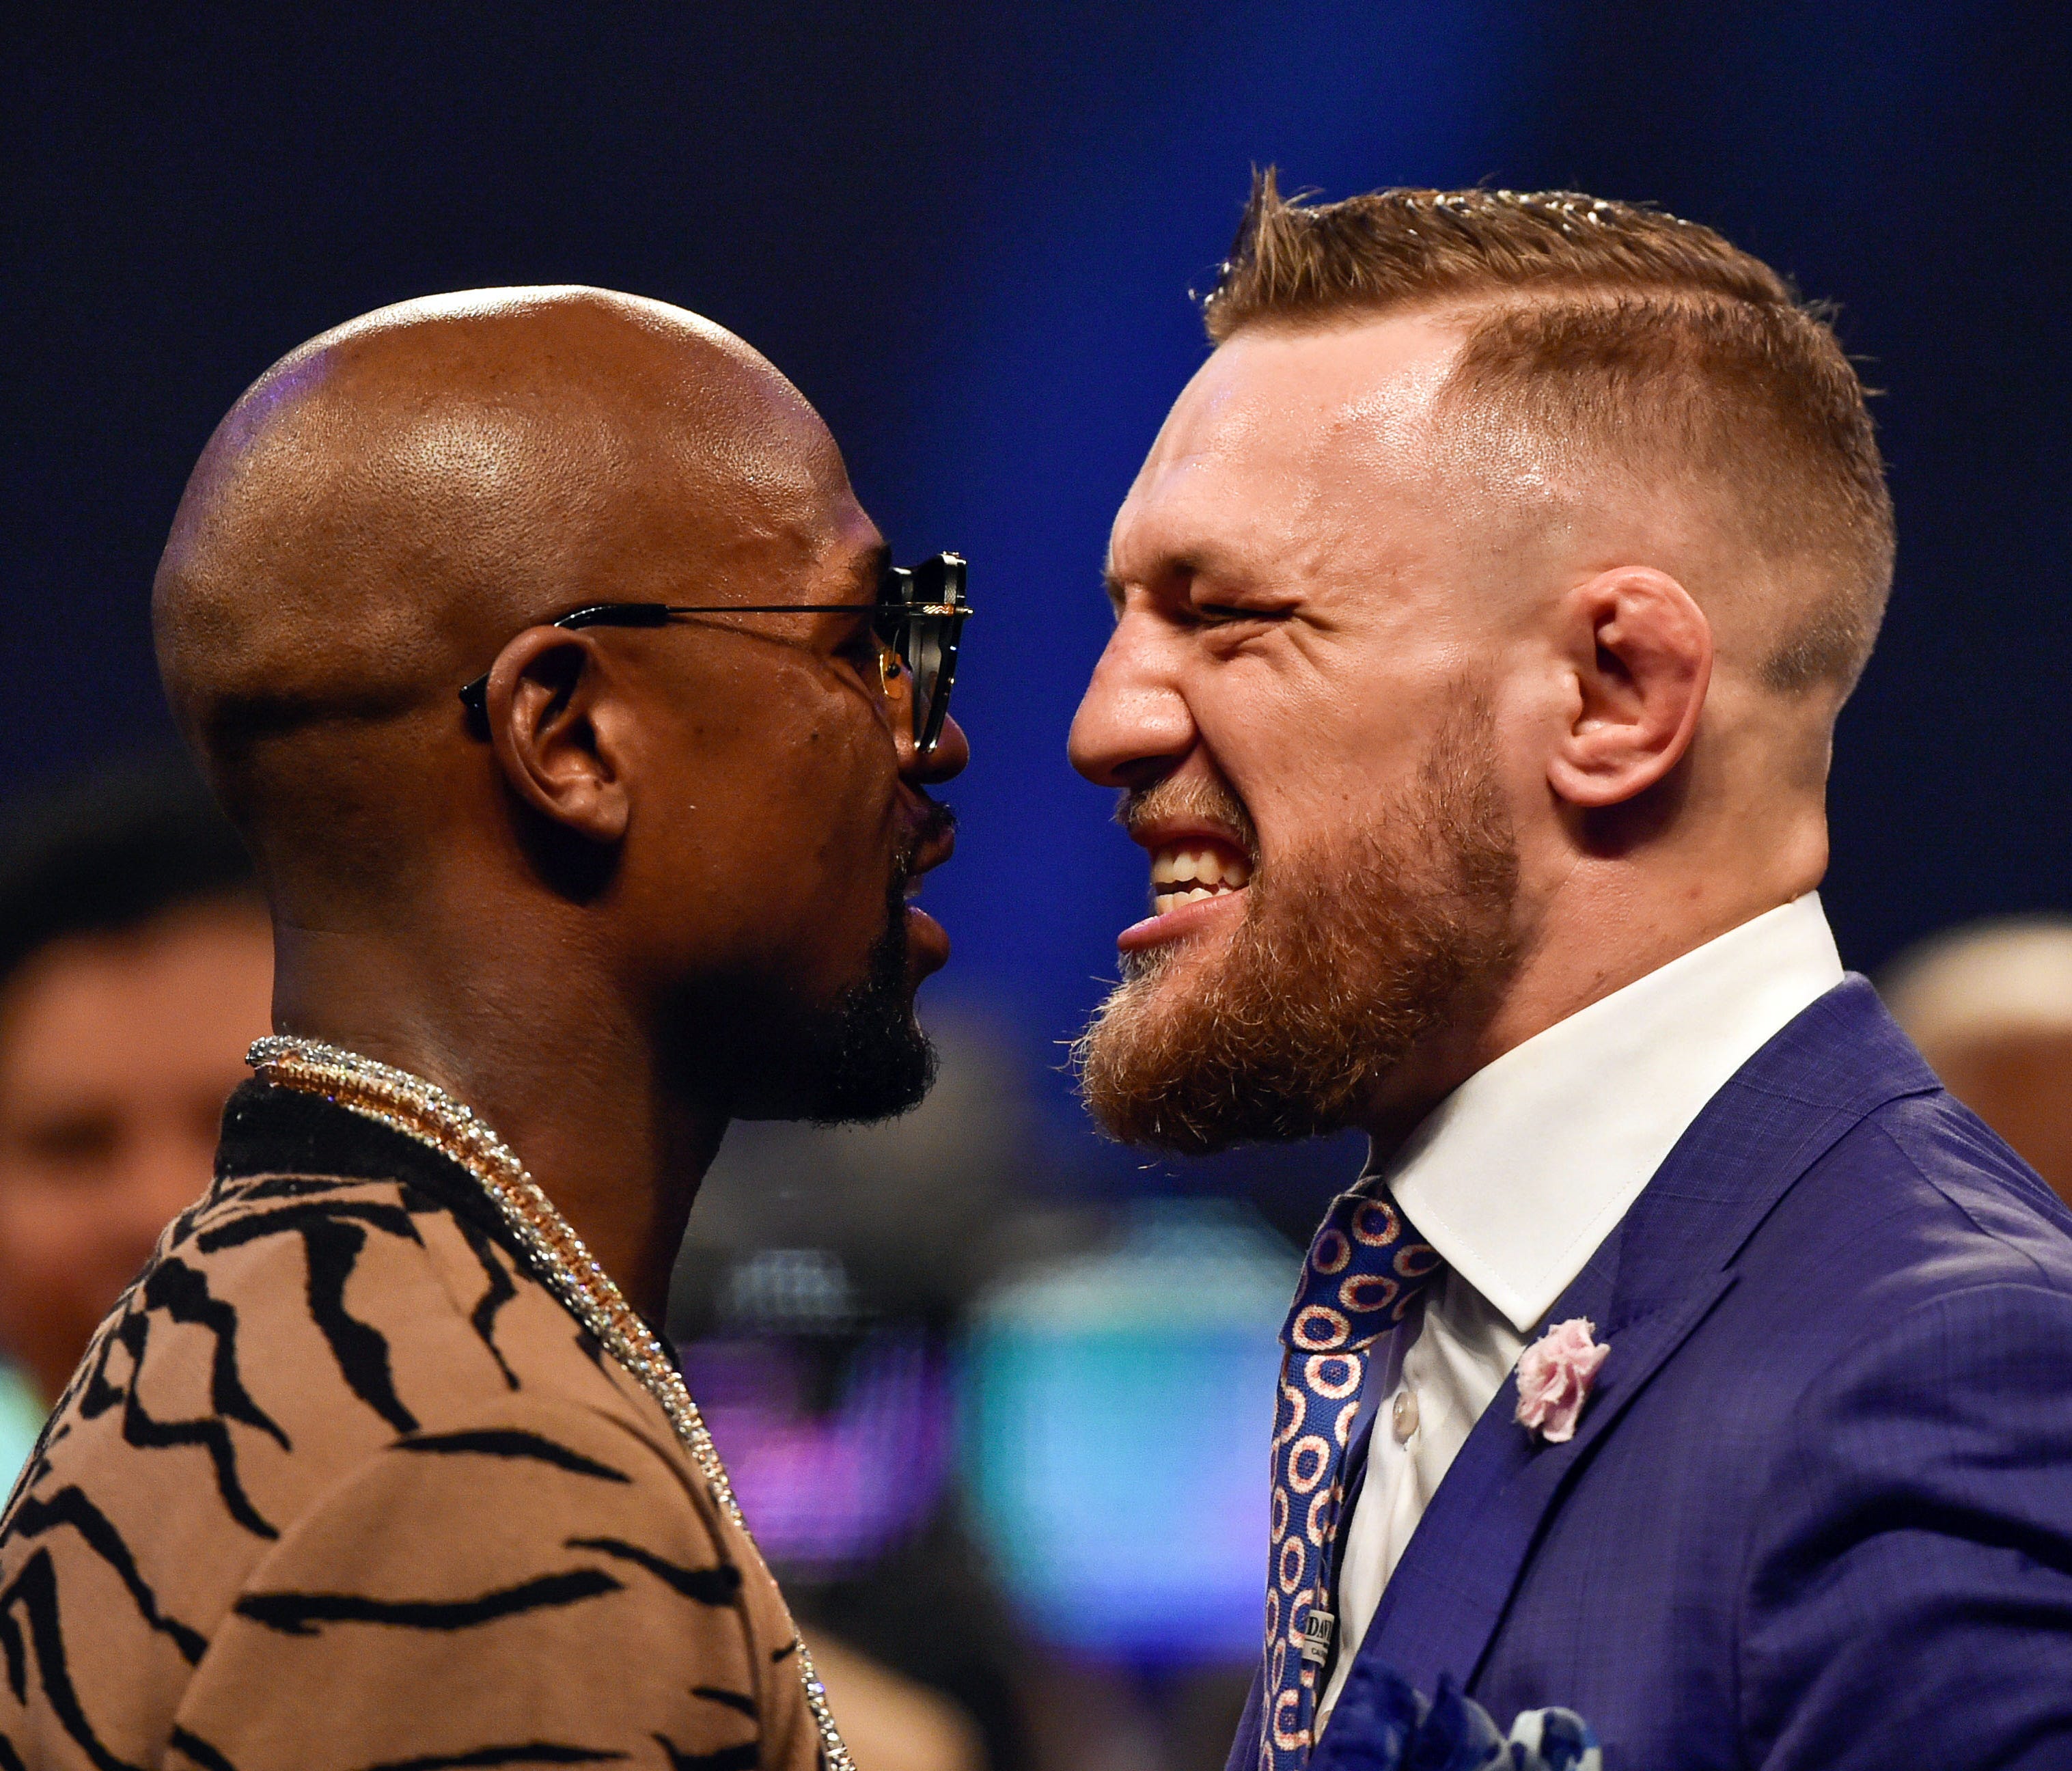 Floyd Mayweather, left, and Conor McGregor, right, face off during their world tour press conference to promote their Aug. 26 fight.